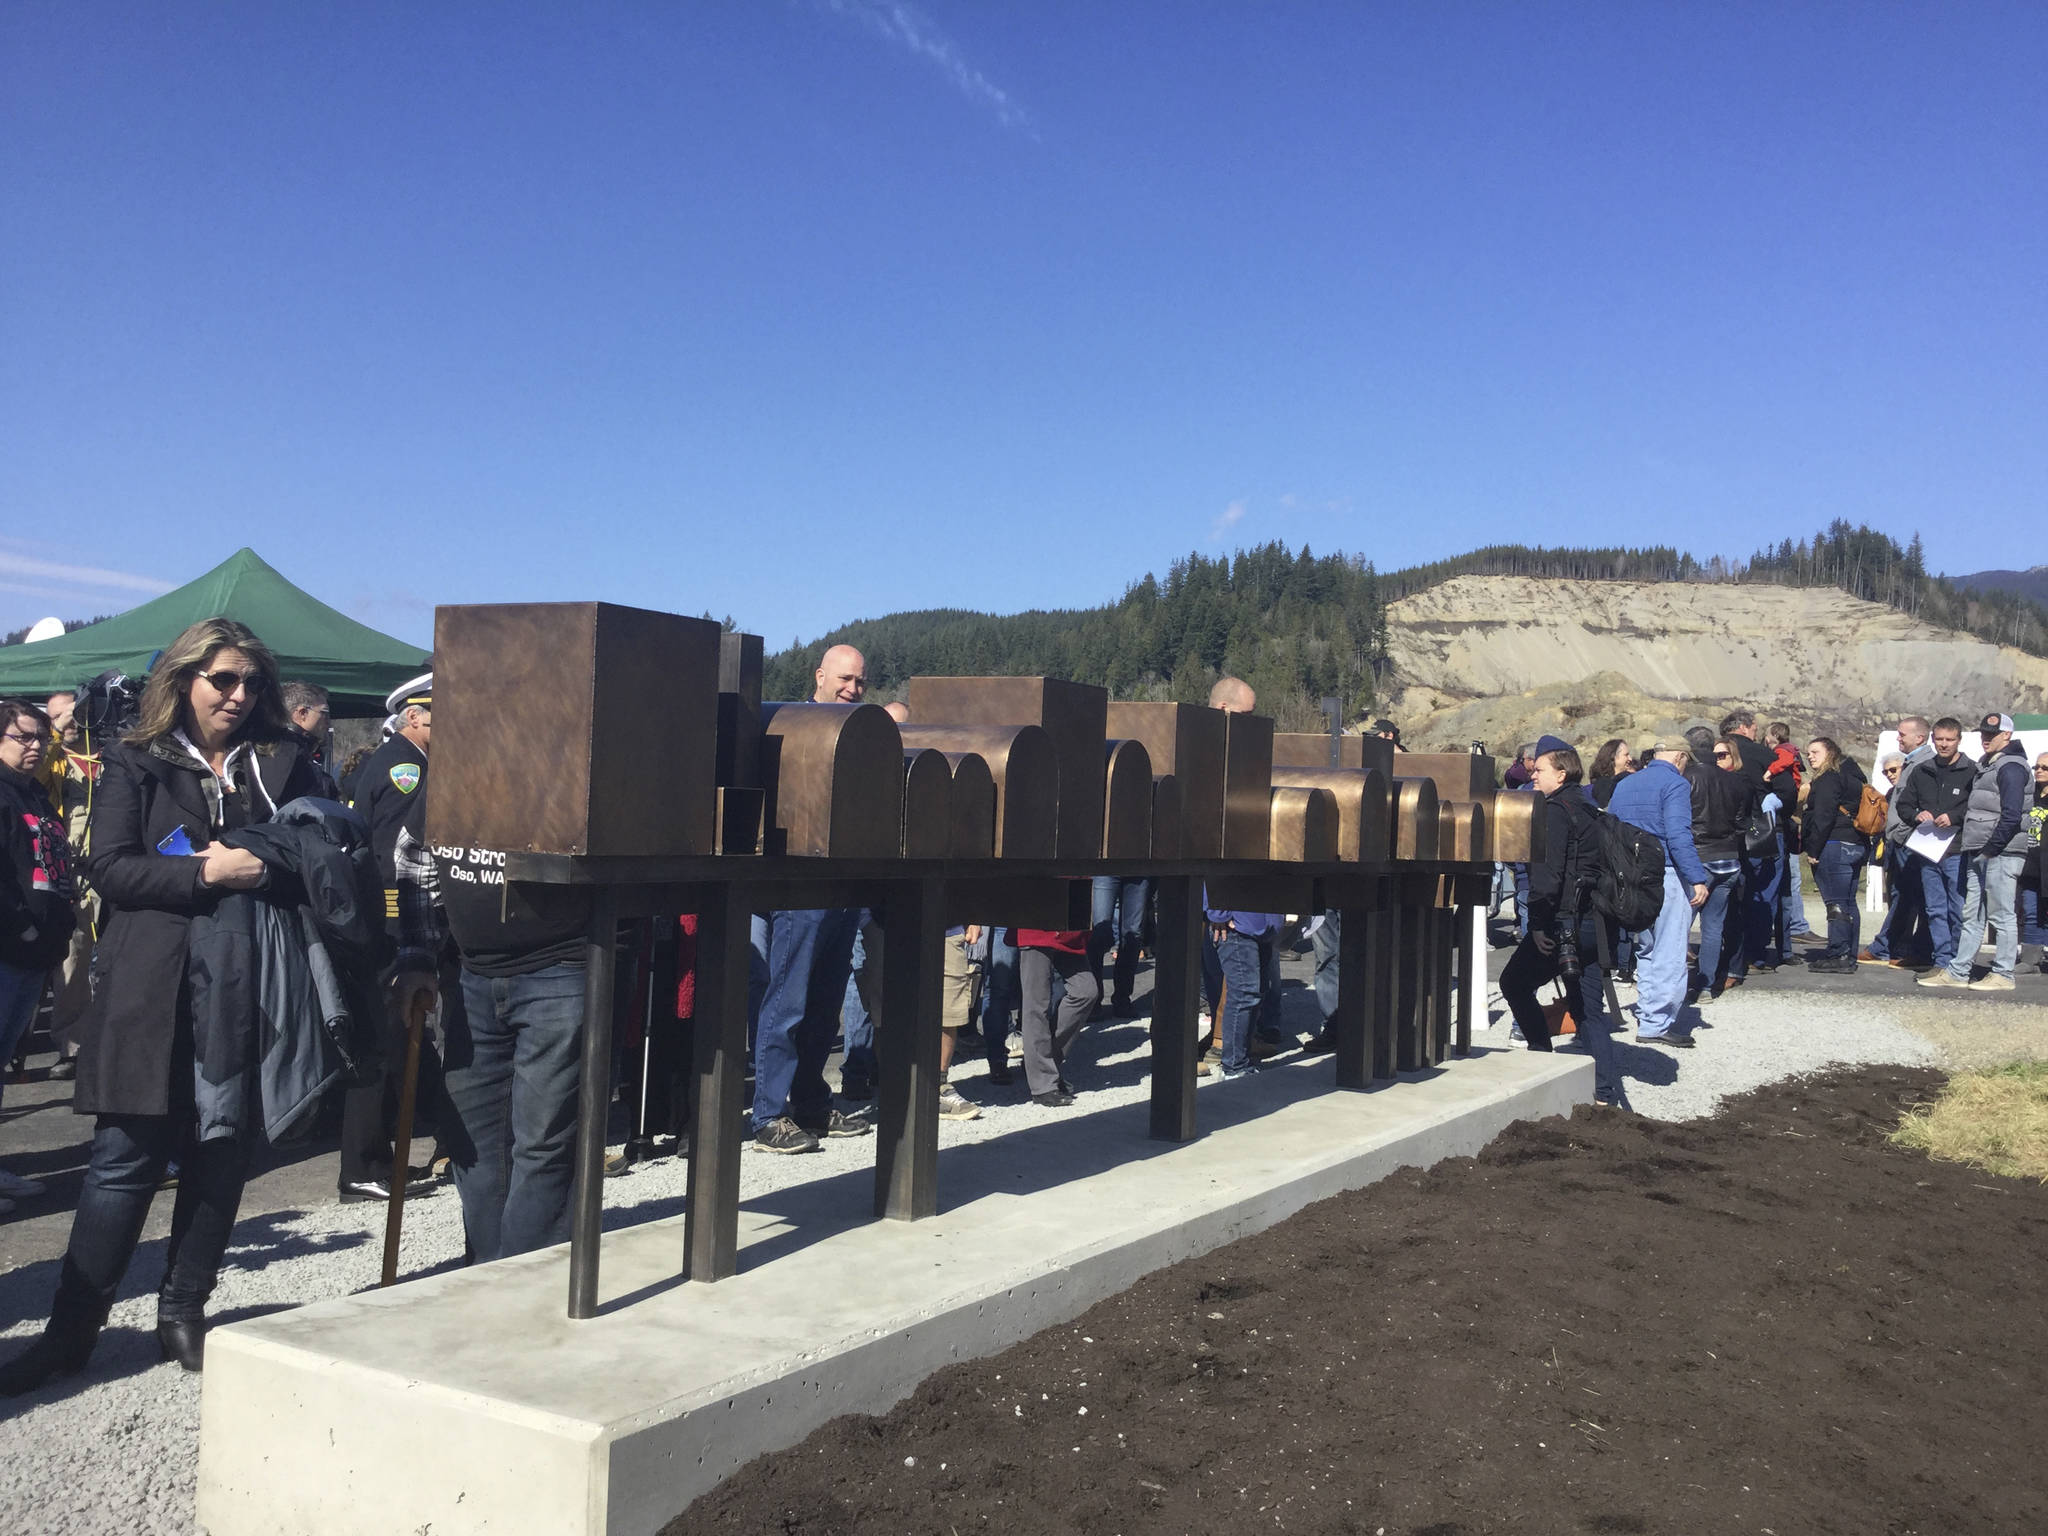 A bronze sculpture titled “It was a Home” depicting a row of mailboxes that stood at the entrance to Steelhead Haven was unveiled during a memorial remembrance ceremony marking five years since the Oso landslide.                                ‘Always in our hearts. Never forgotten.’